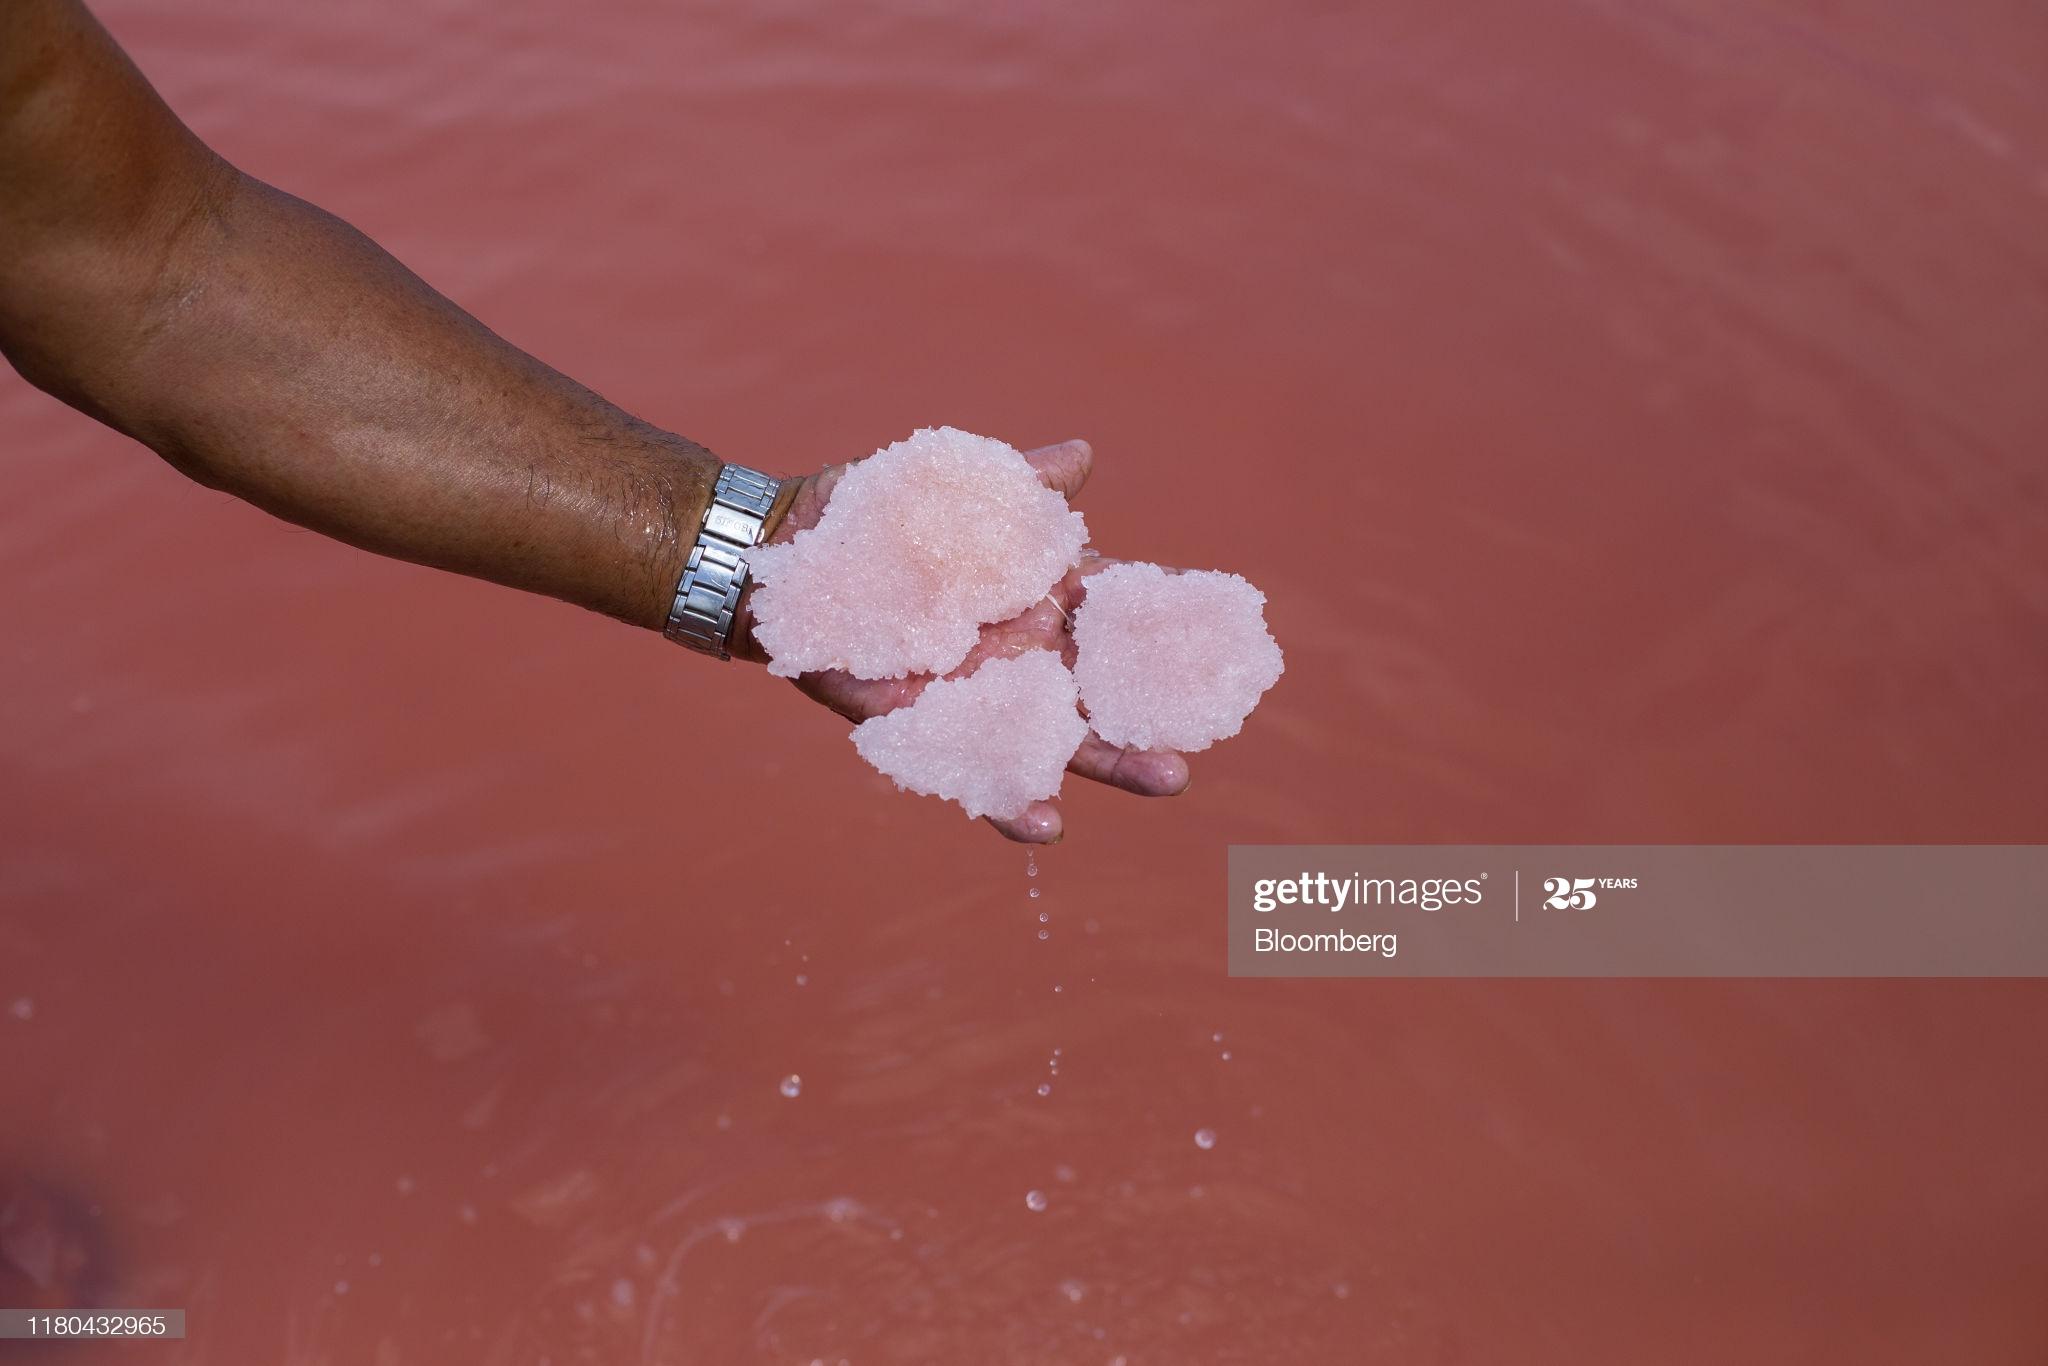 Art and Documentary Photography - Loading gettyimages-1180432965-2048x2048.jpg